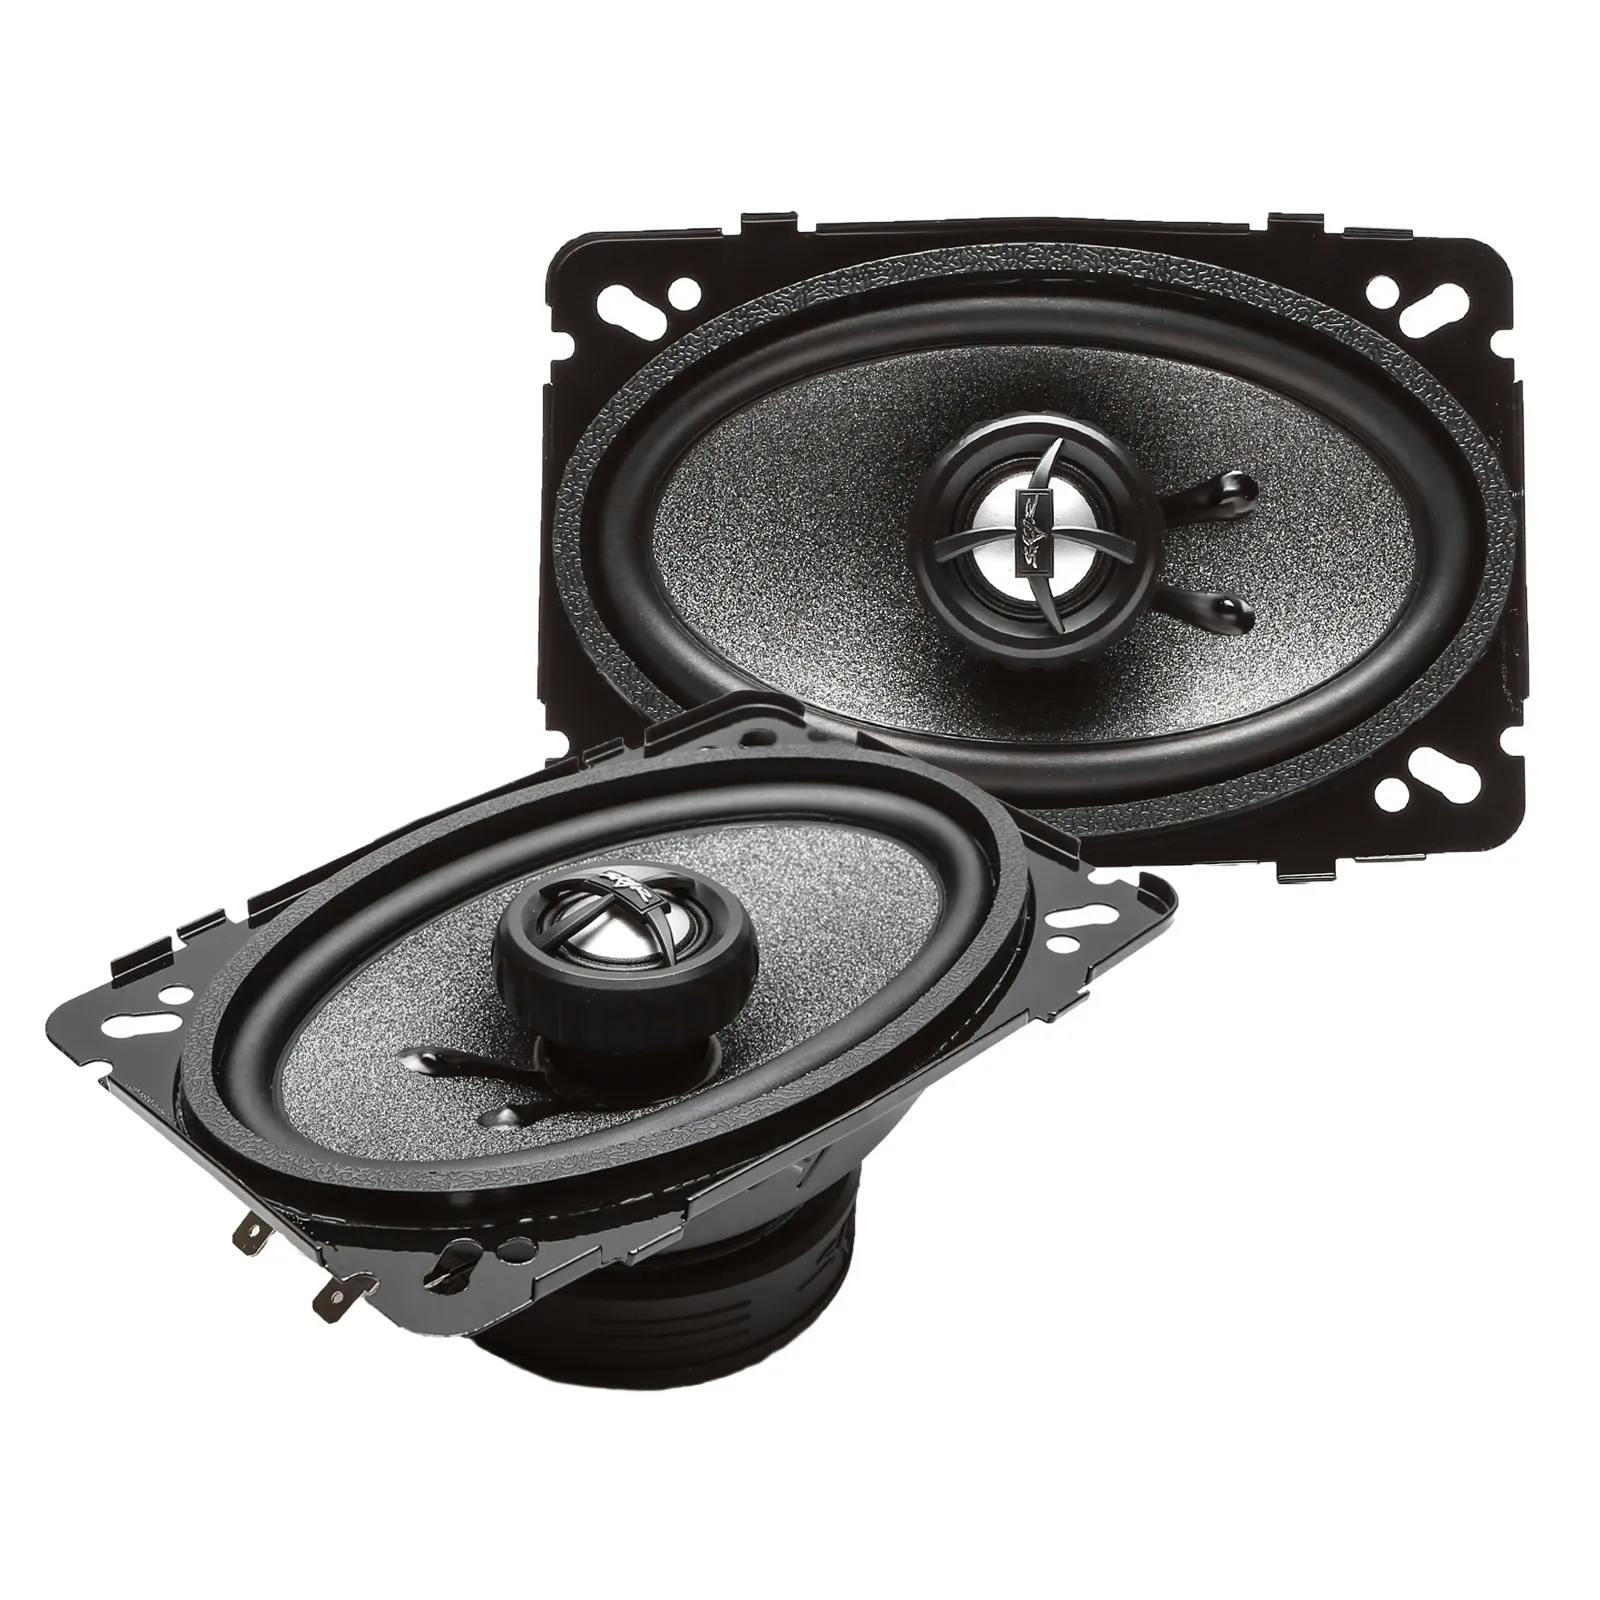 Featured Product Photo for RPX46 | 4" x 6" 150 Watt Coaxial Car Speakers - Pair